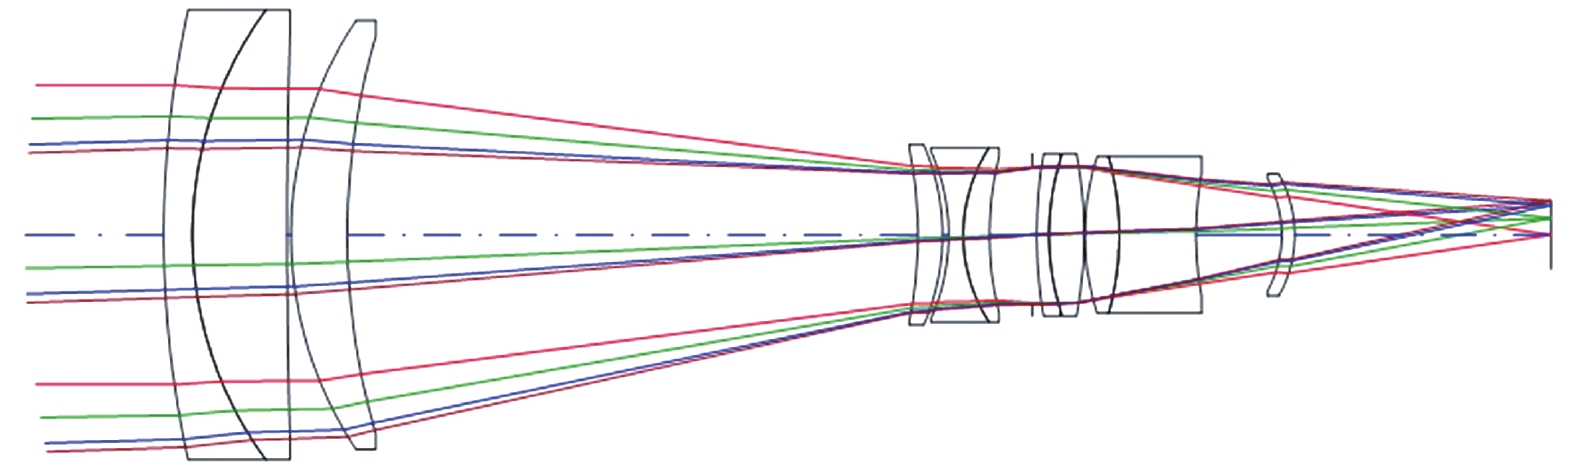 Diagram of 126 mm focal length optical system with fixed stop position scheme